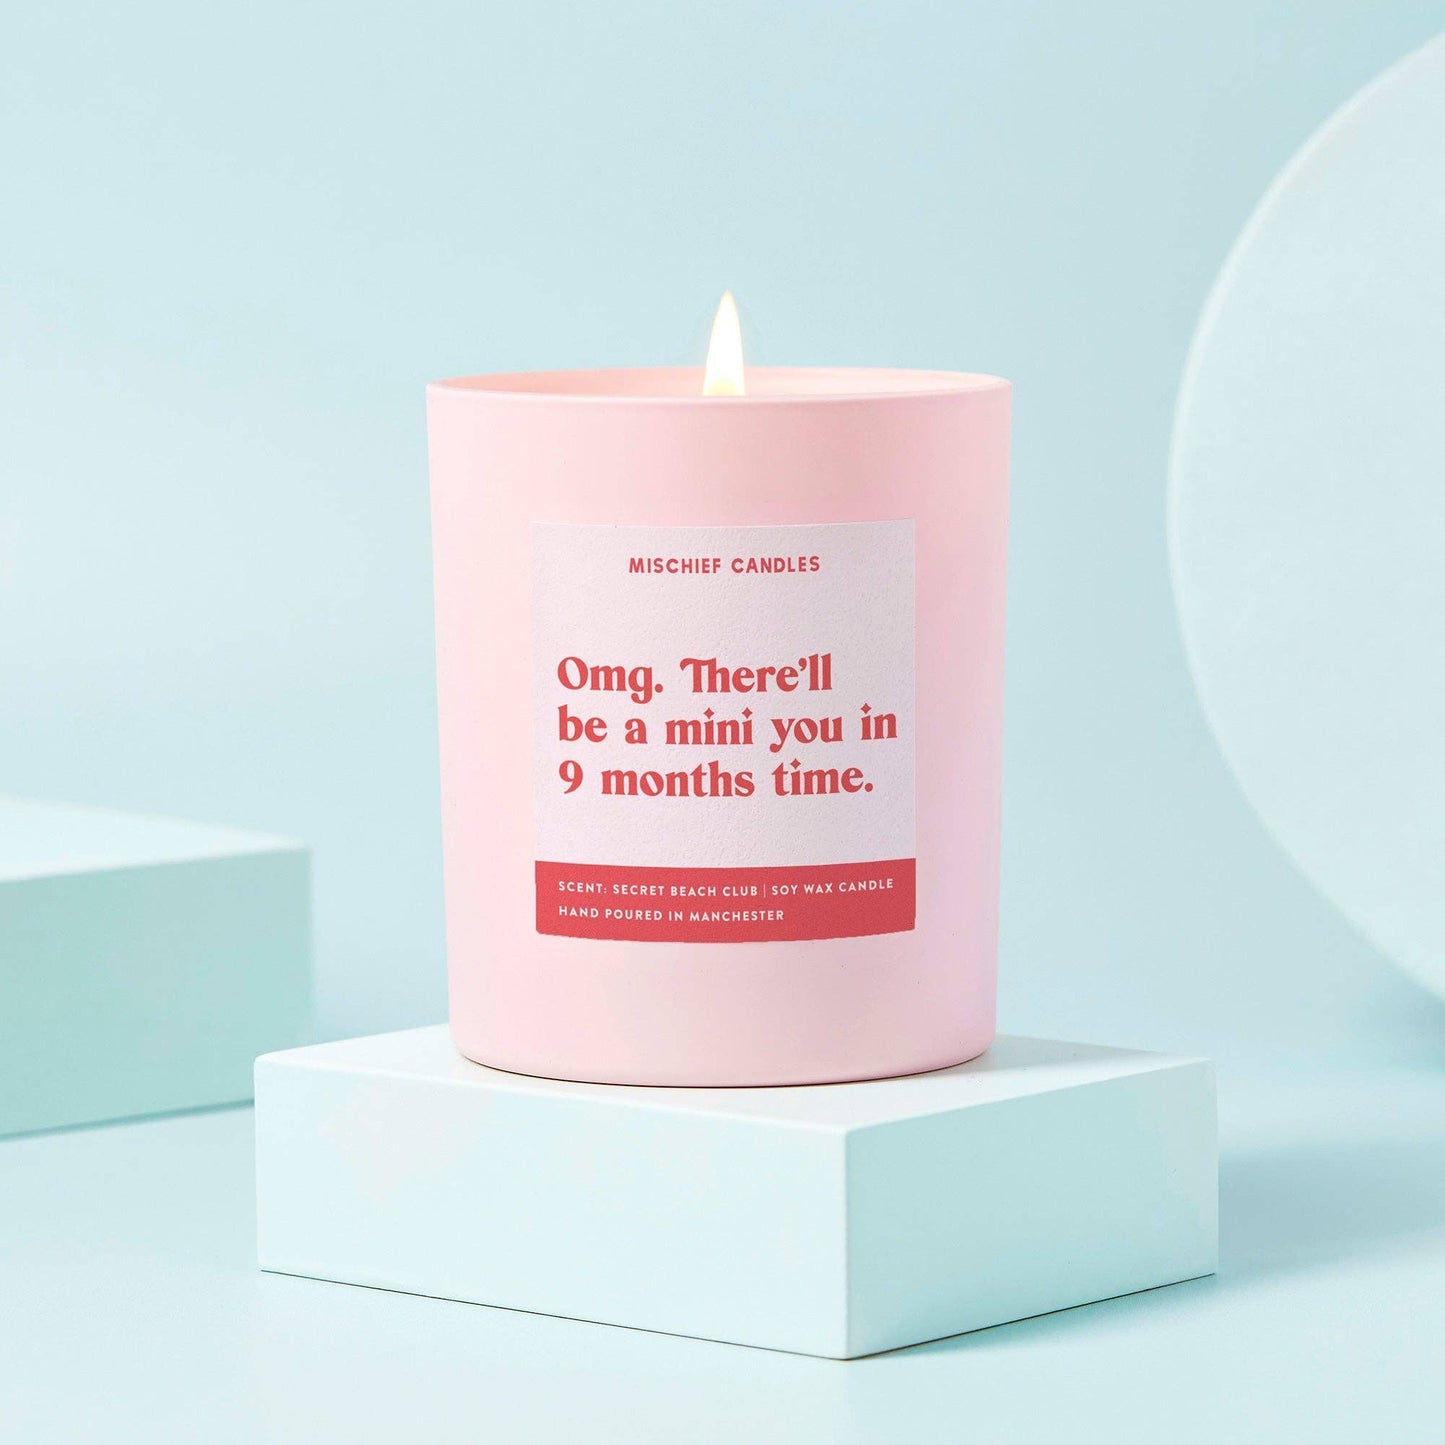 OMG. THERE'LL BE A MINI YOU IN 9 MONTHS TIME CANDLE